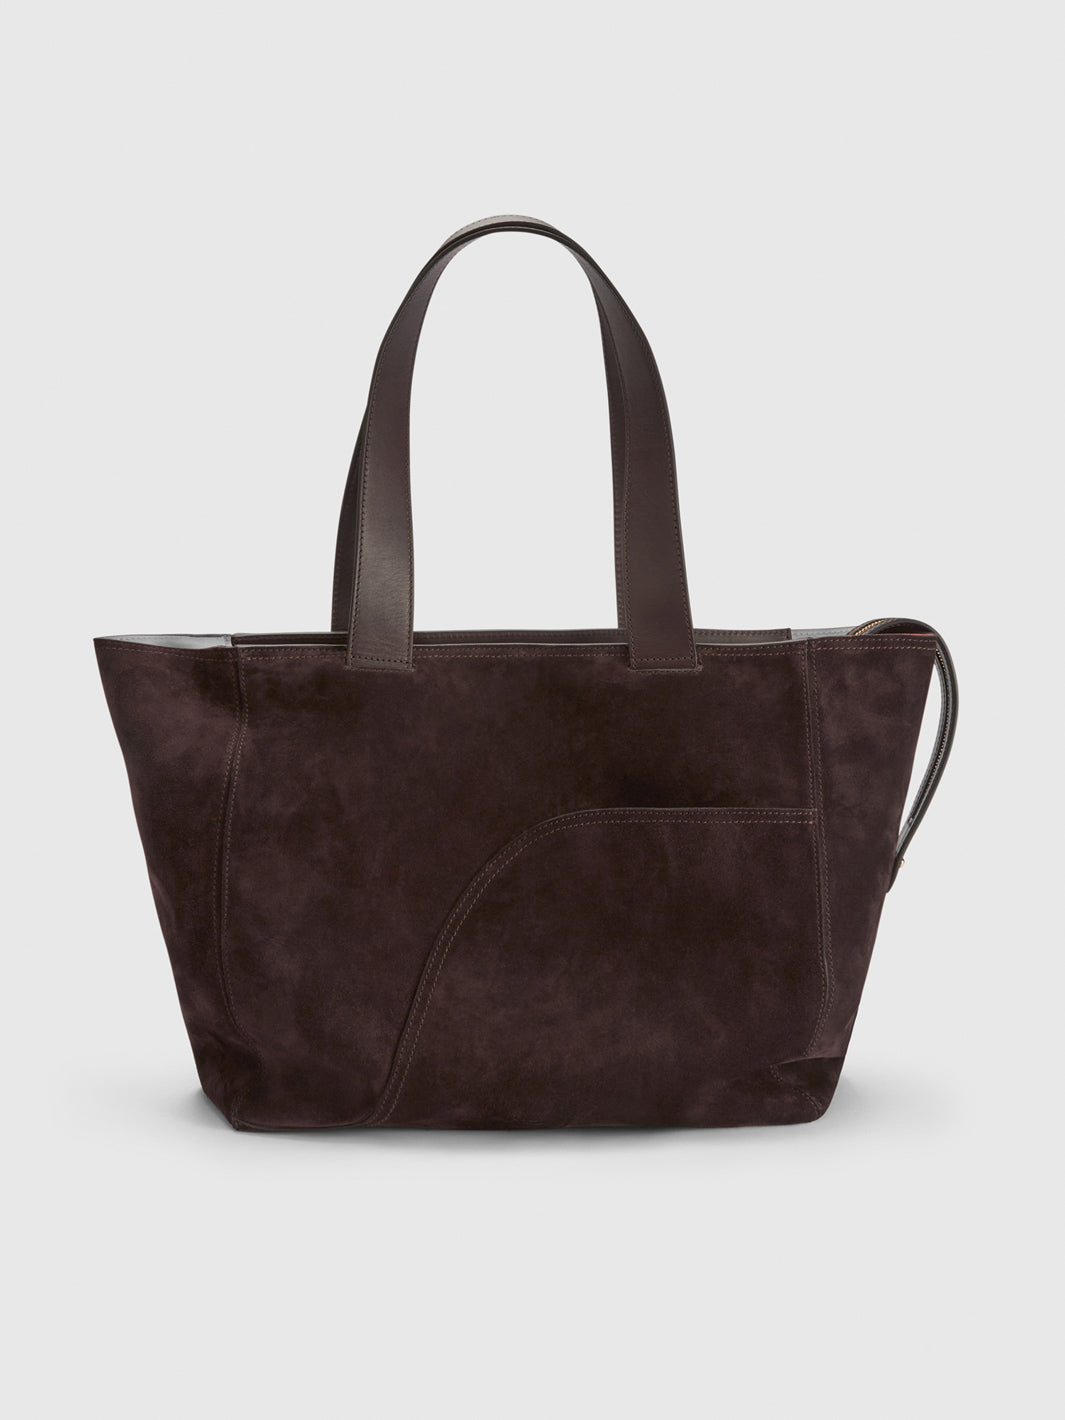 Treviso Walnut Suede/Leather Large Tote bag